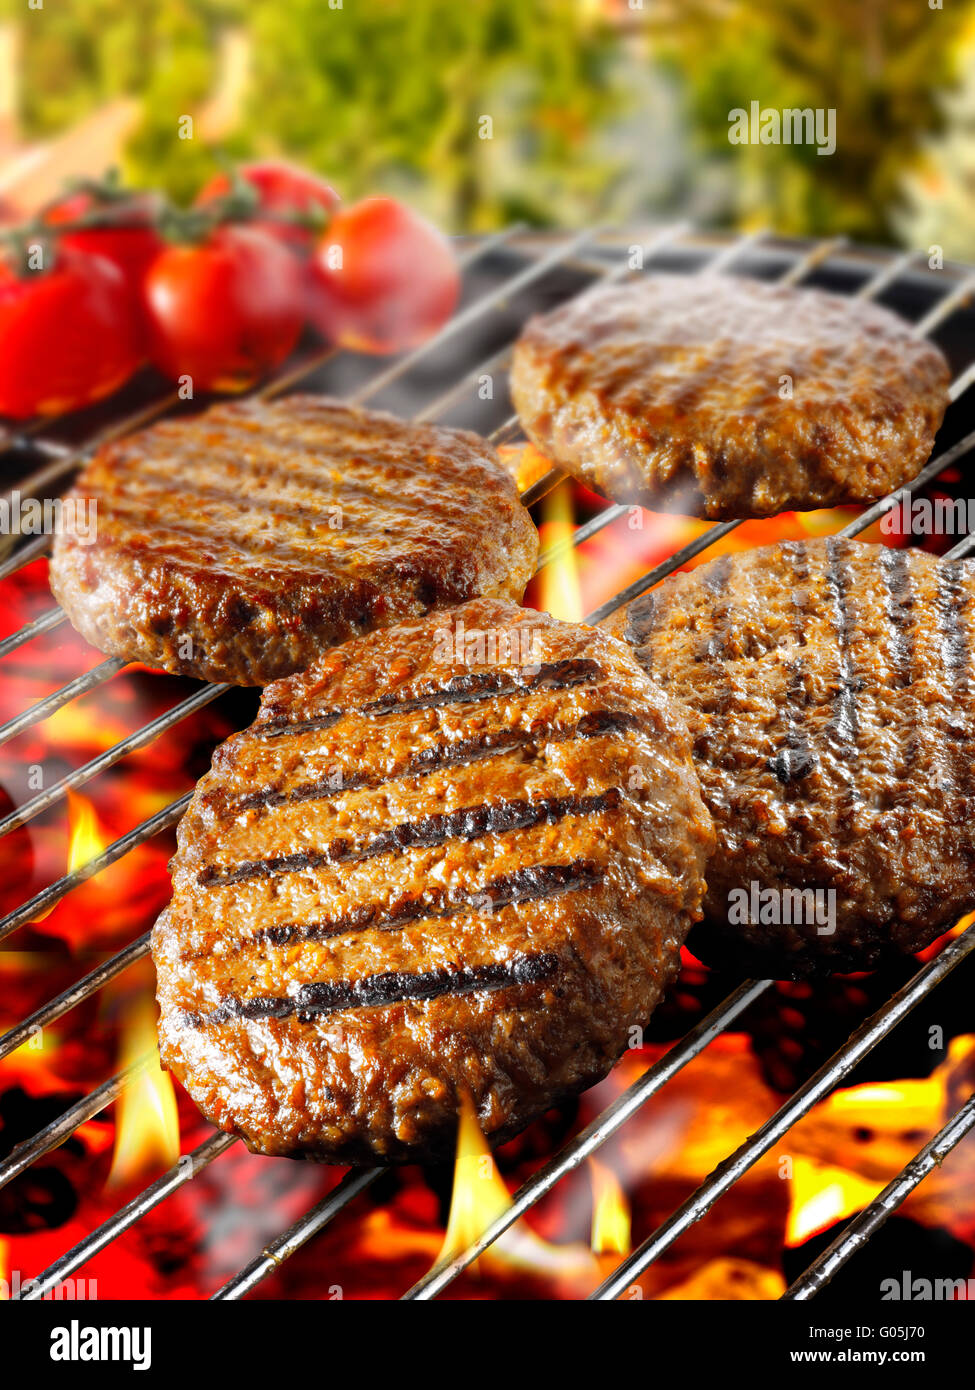 Beef burgers, hamburgers, being cooked on an open barbecue over hot flaming charcoals Stock Photo